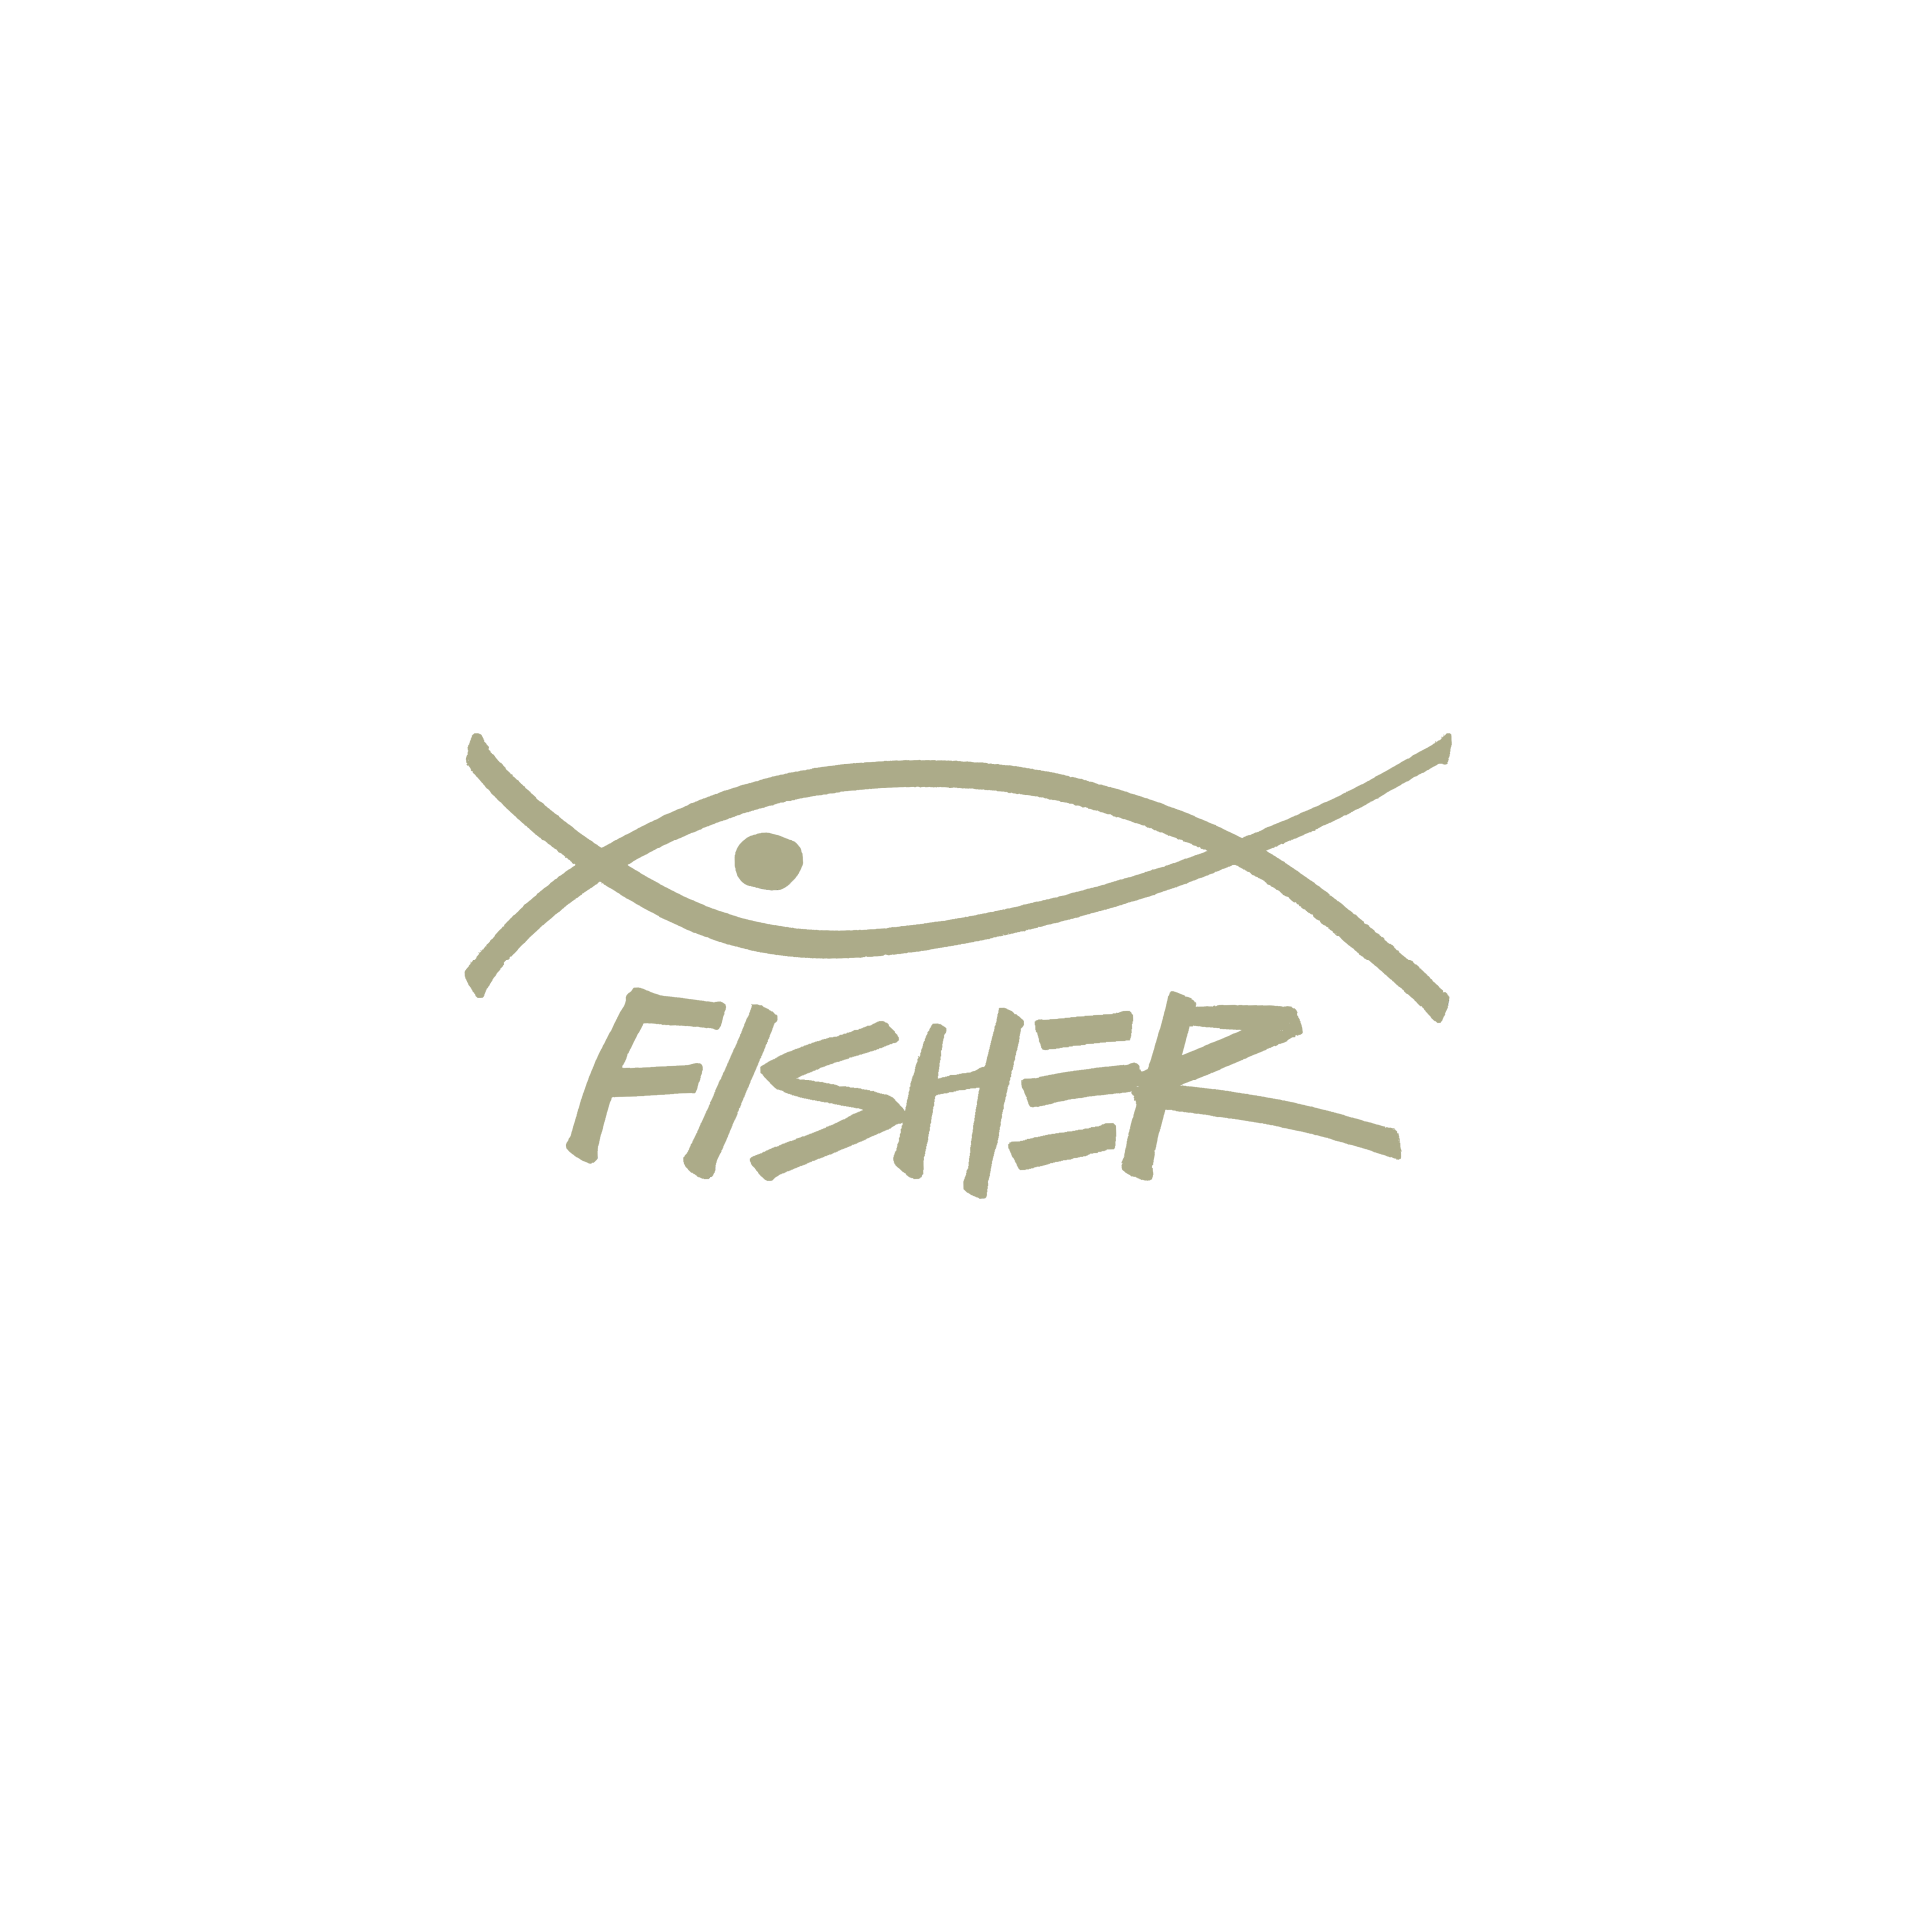 Fischer is a local surf goods store in Seoul, South Korea that carries a wide range of wonderful products. 